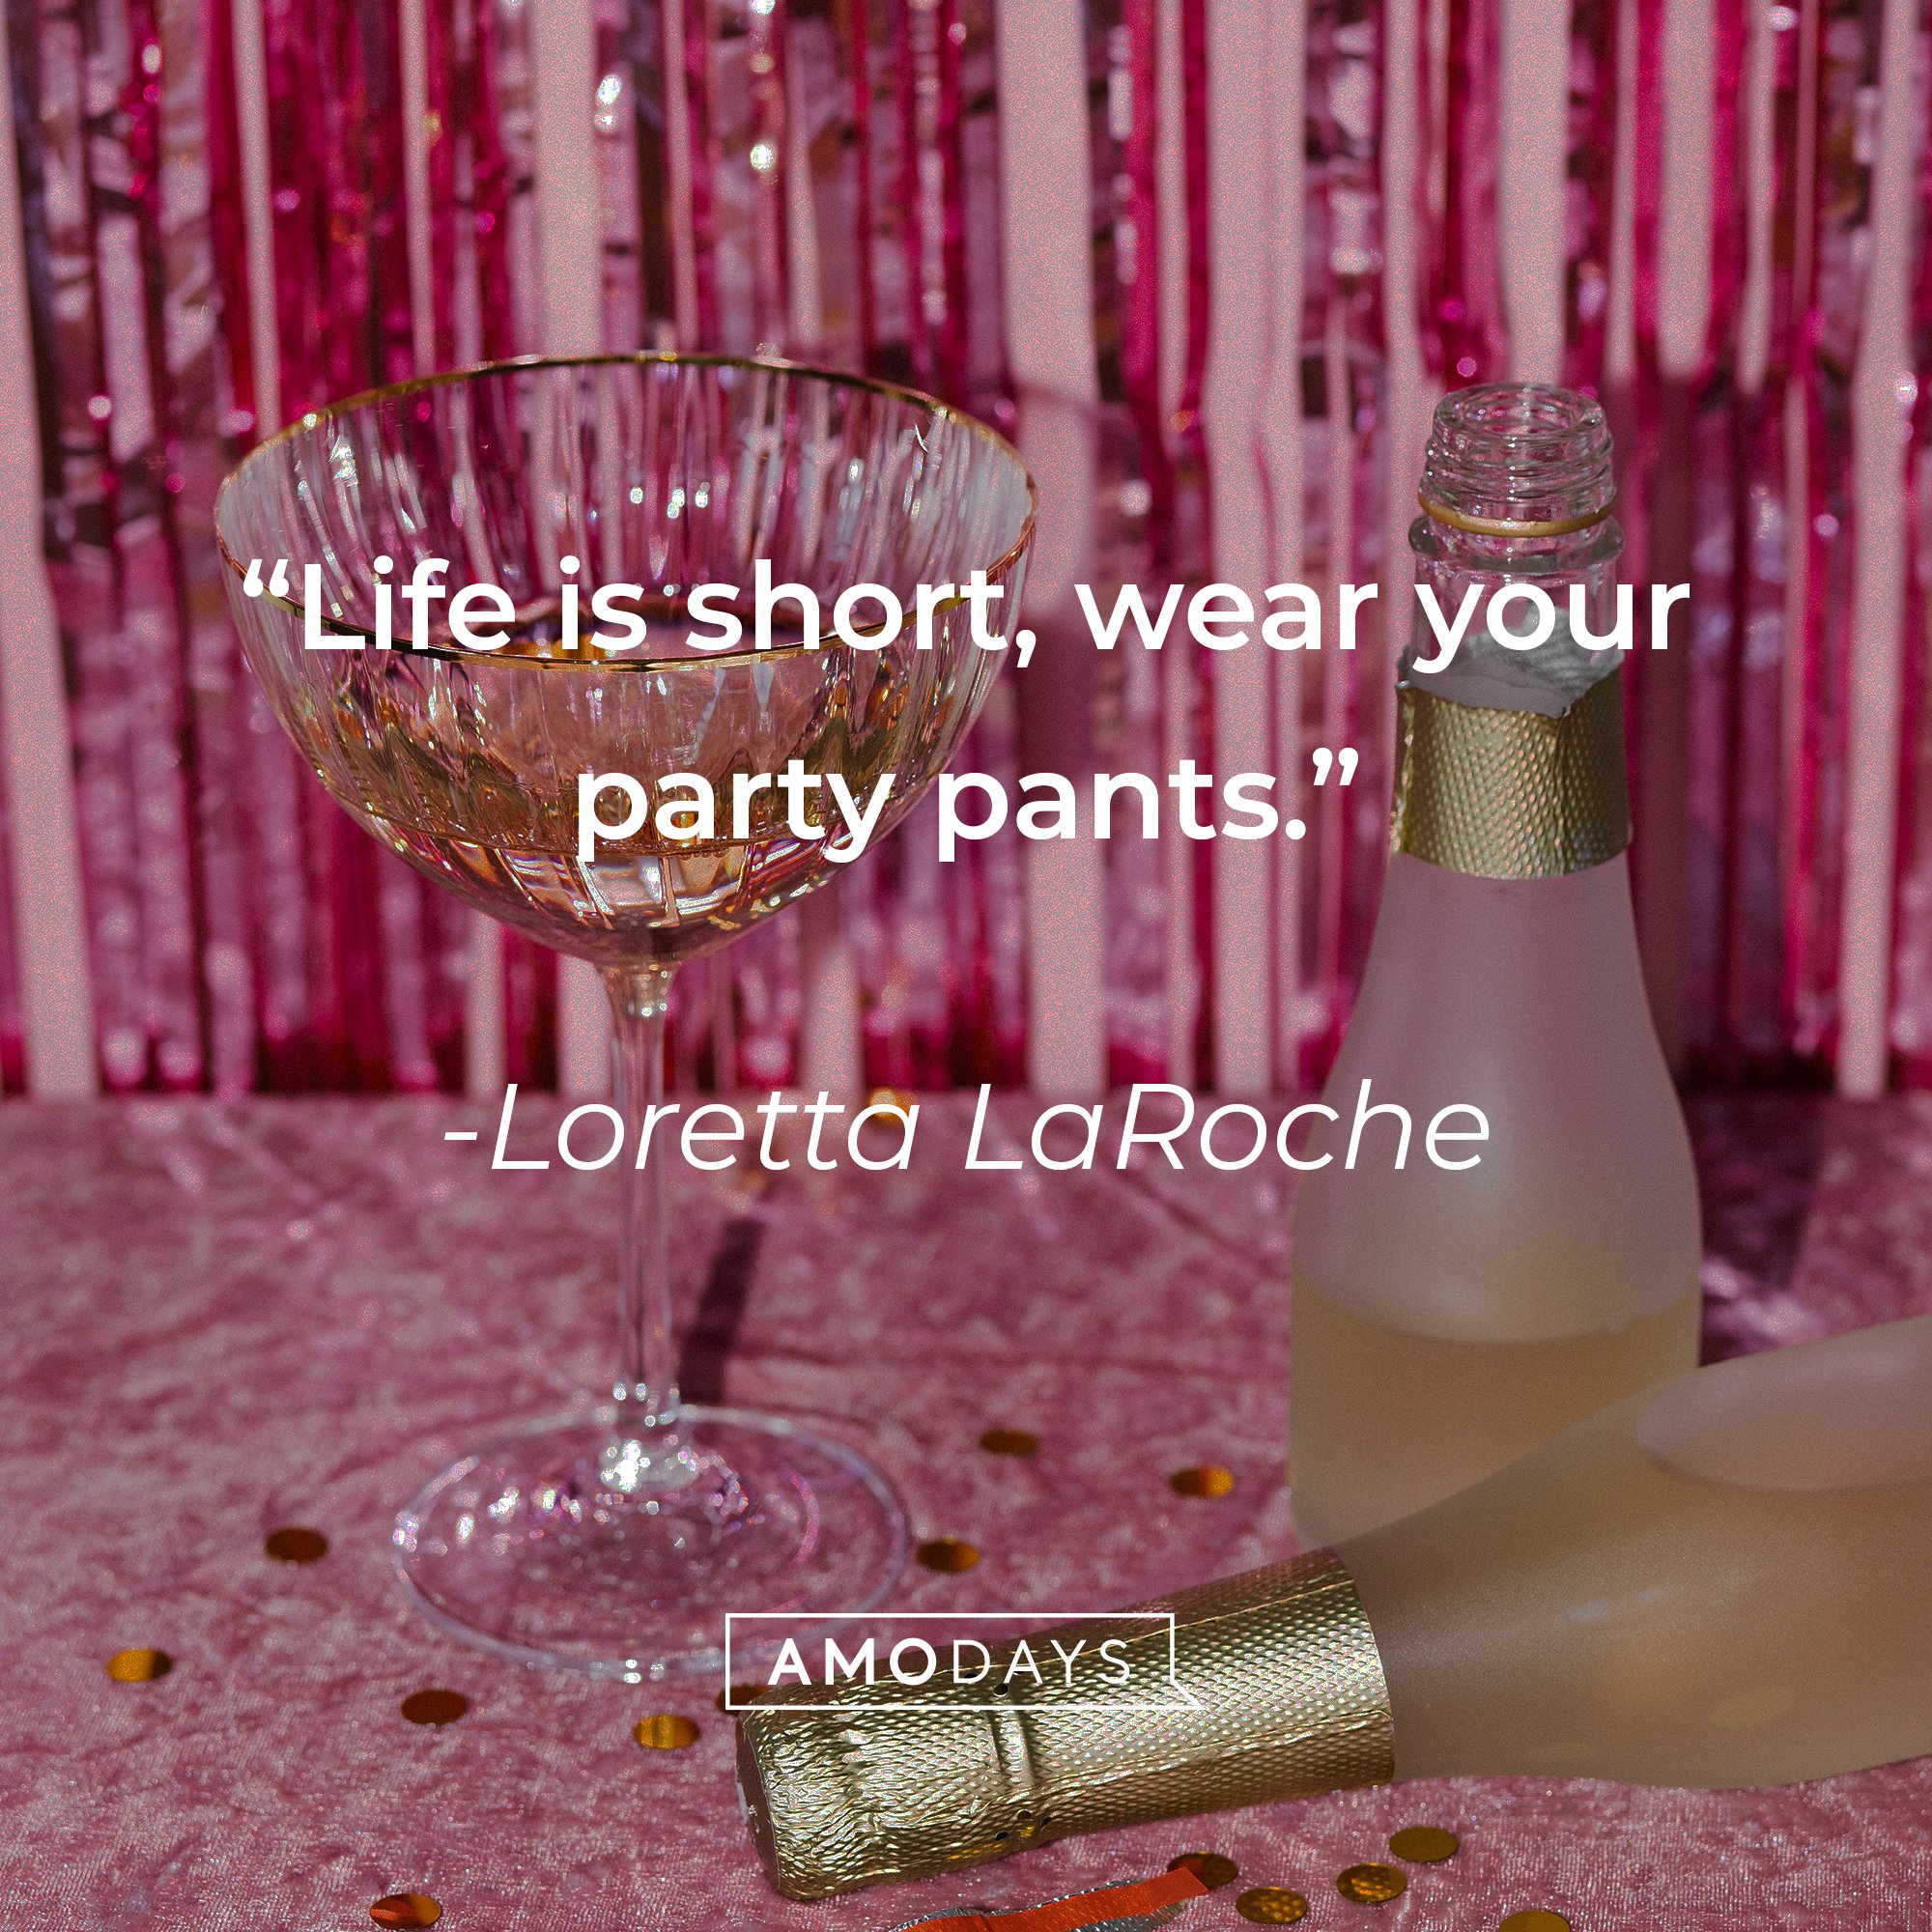 Loretta LaRoche's quote: “Life is short, wear your party pants.” | Image: AmoDays